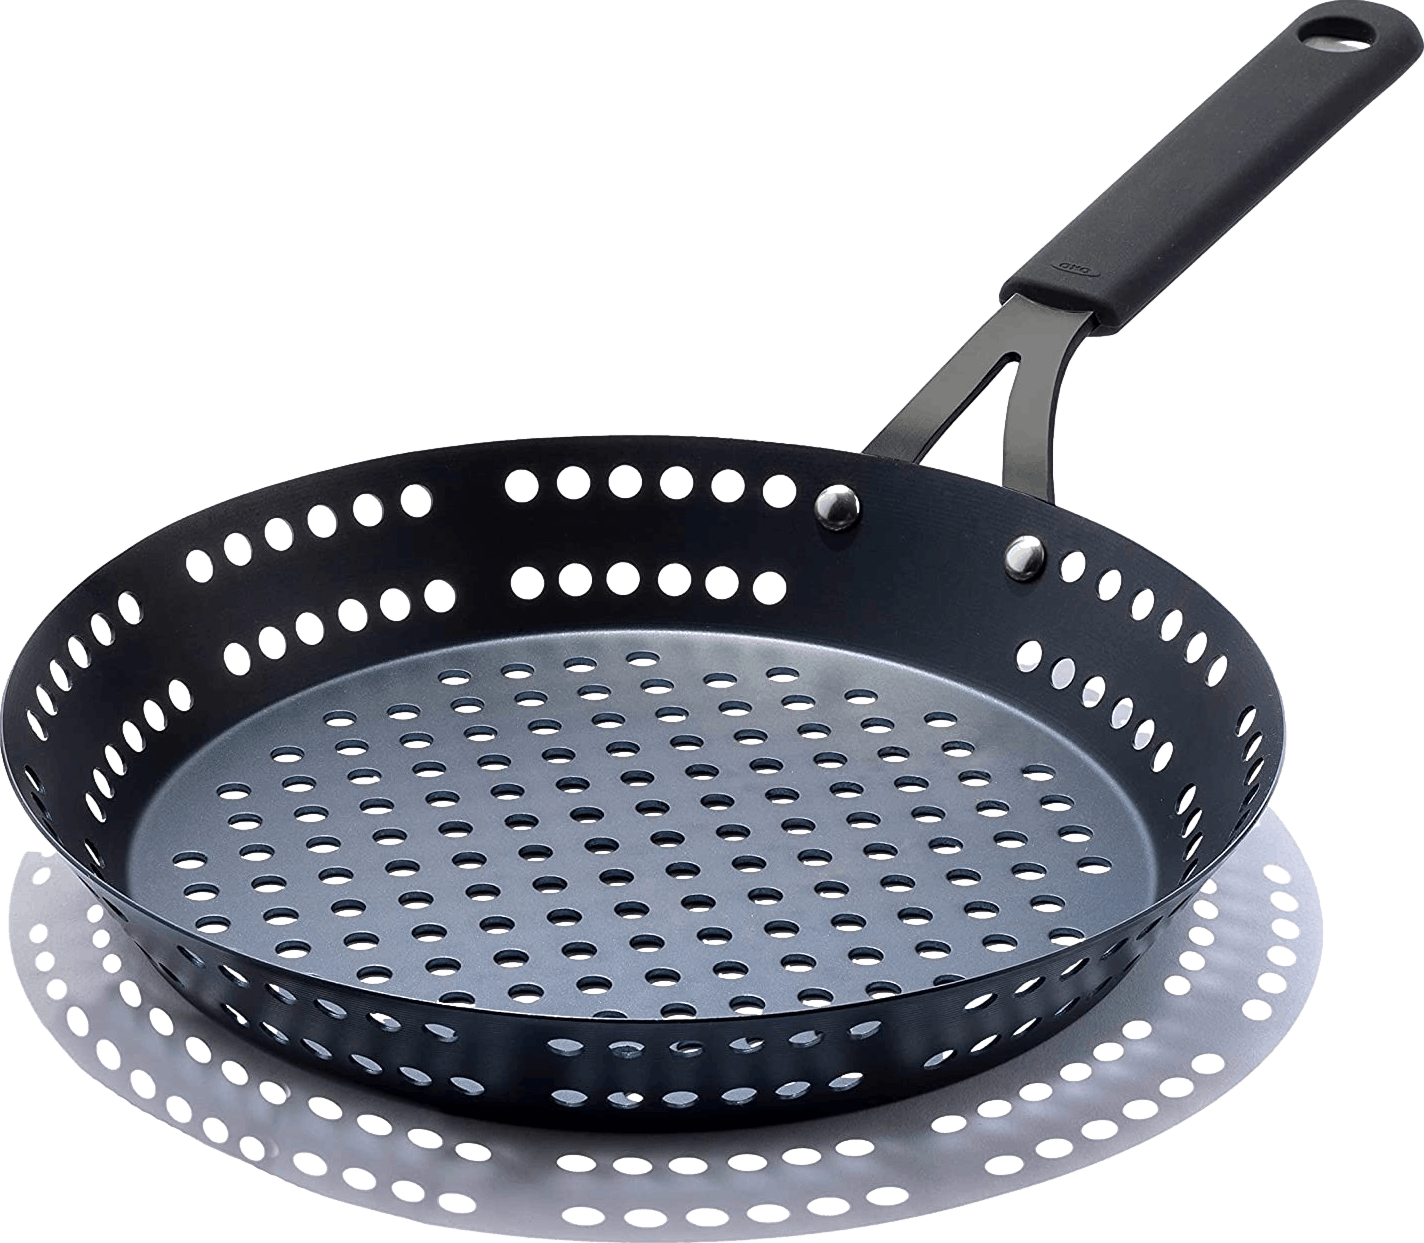 OXO Obsidian Carbon Steel 12" Bbq Fry Pan with Silicone Sleeve Black